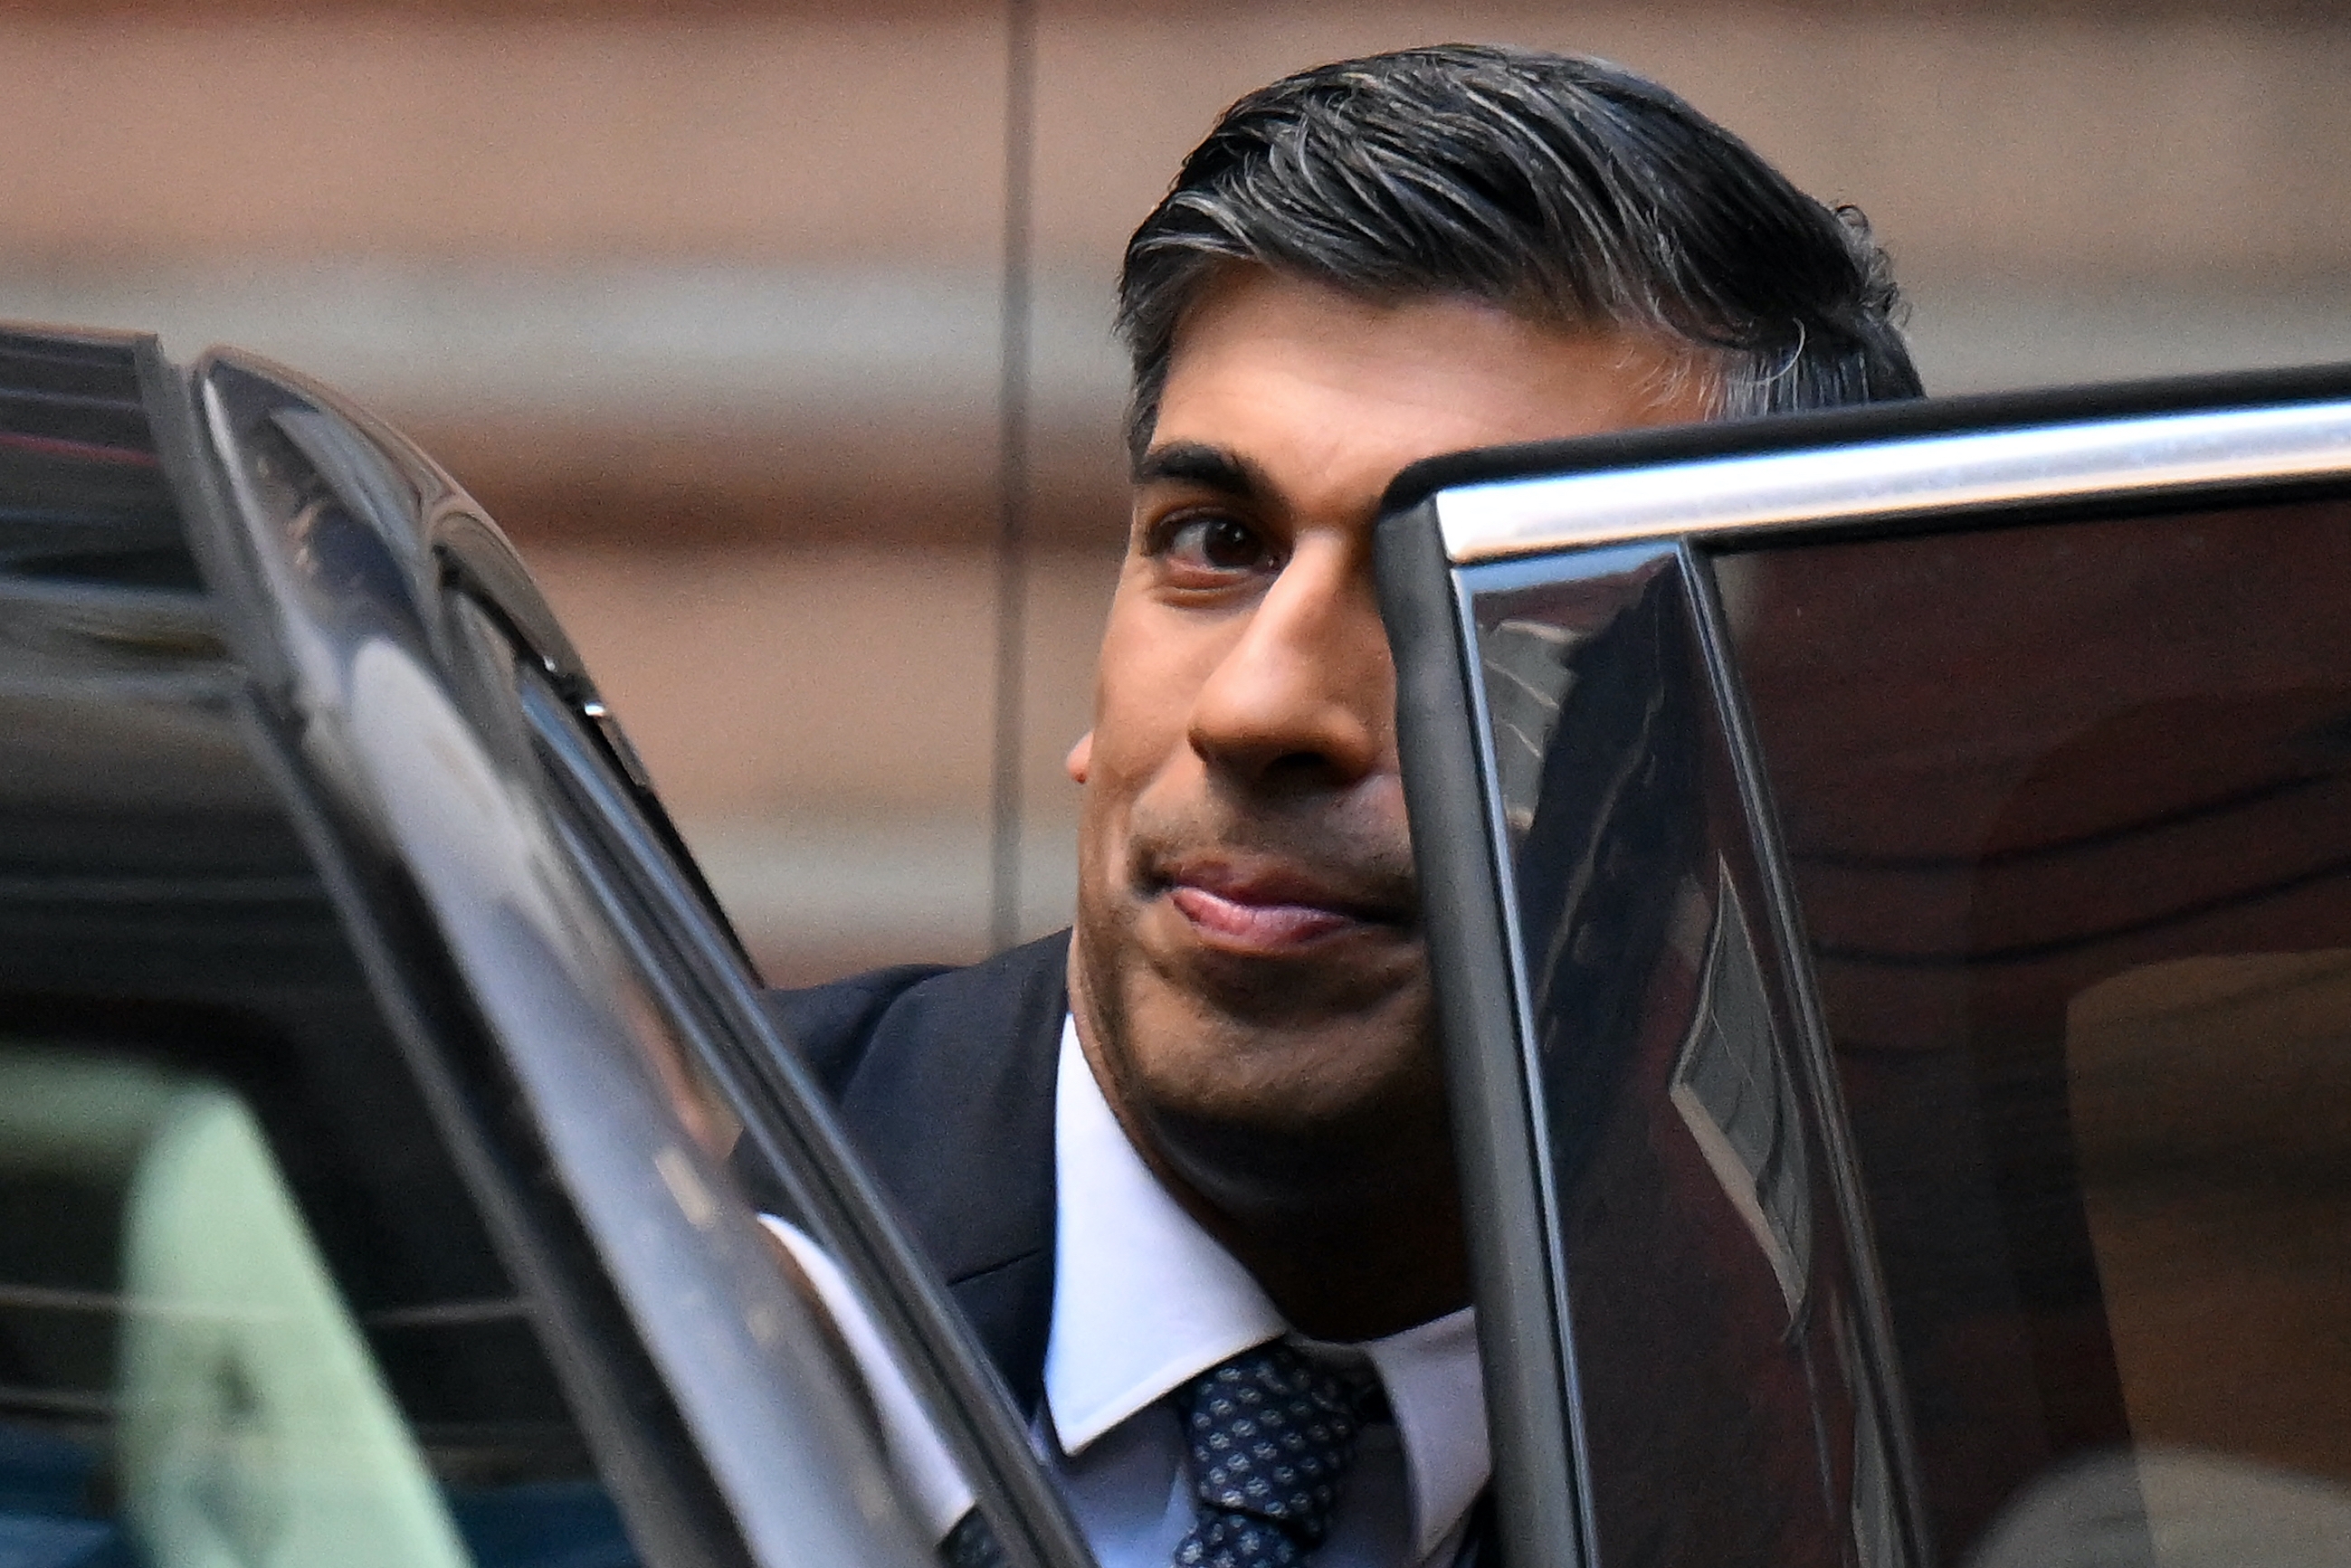 Rishi Sunak leaves Conservative Party HQ in London having been announced as the winner of the party's leadership contest, 24 October 2022 (AFP)